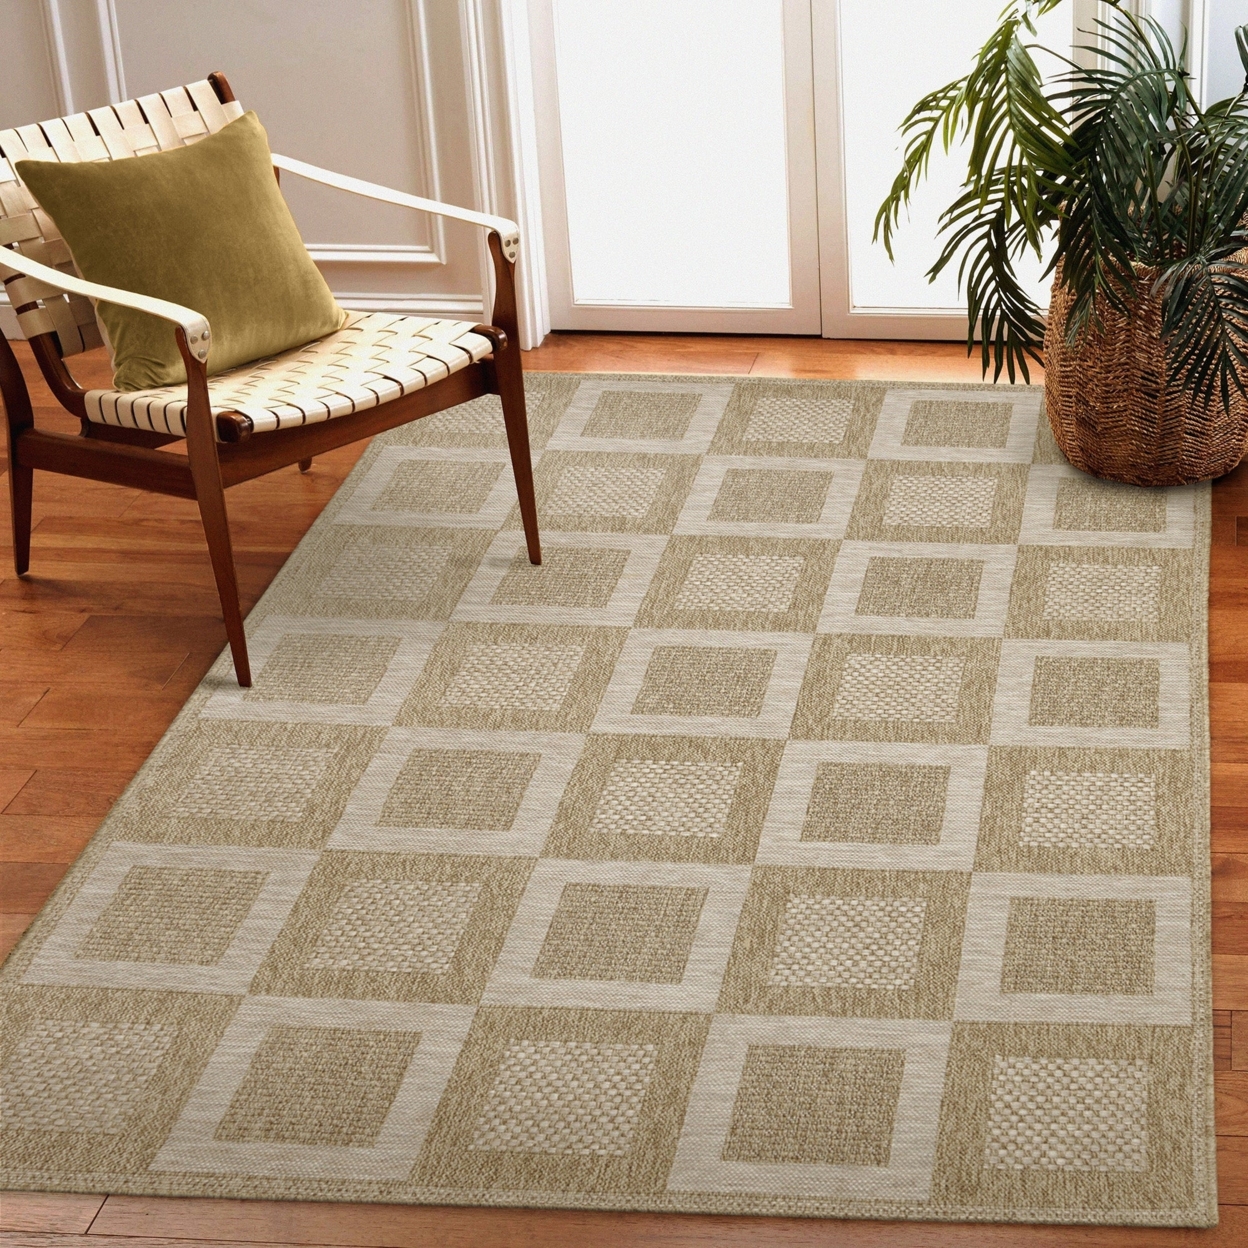 Liora Manne Orly Squares Indoor Outdoor Area Rug Natural - 3'3 X 4'11